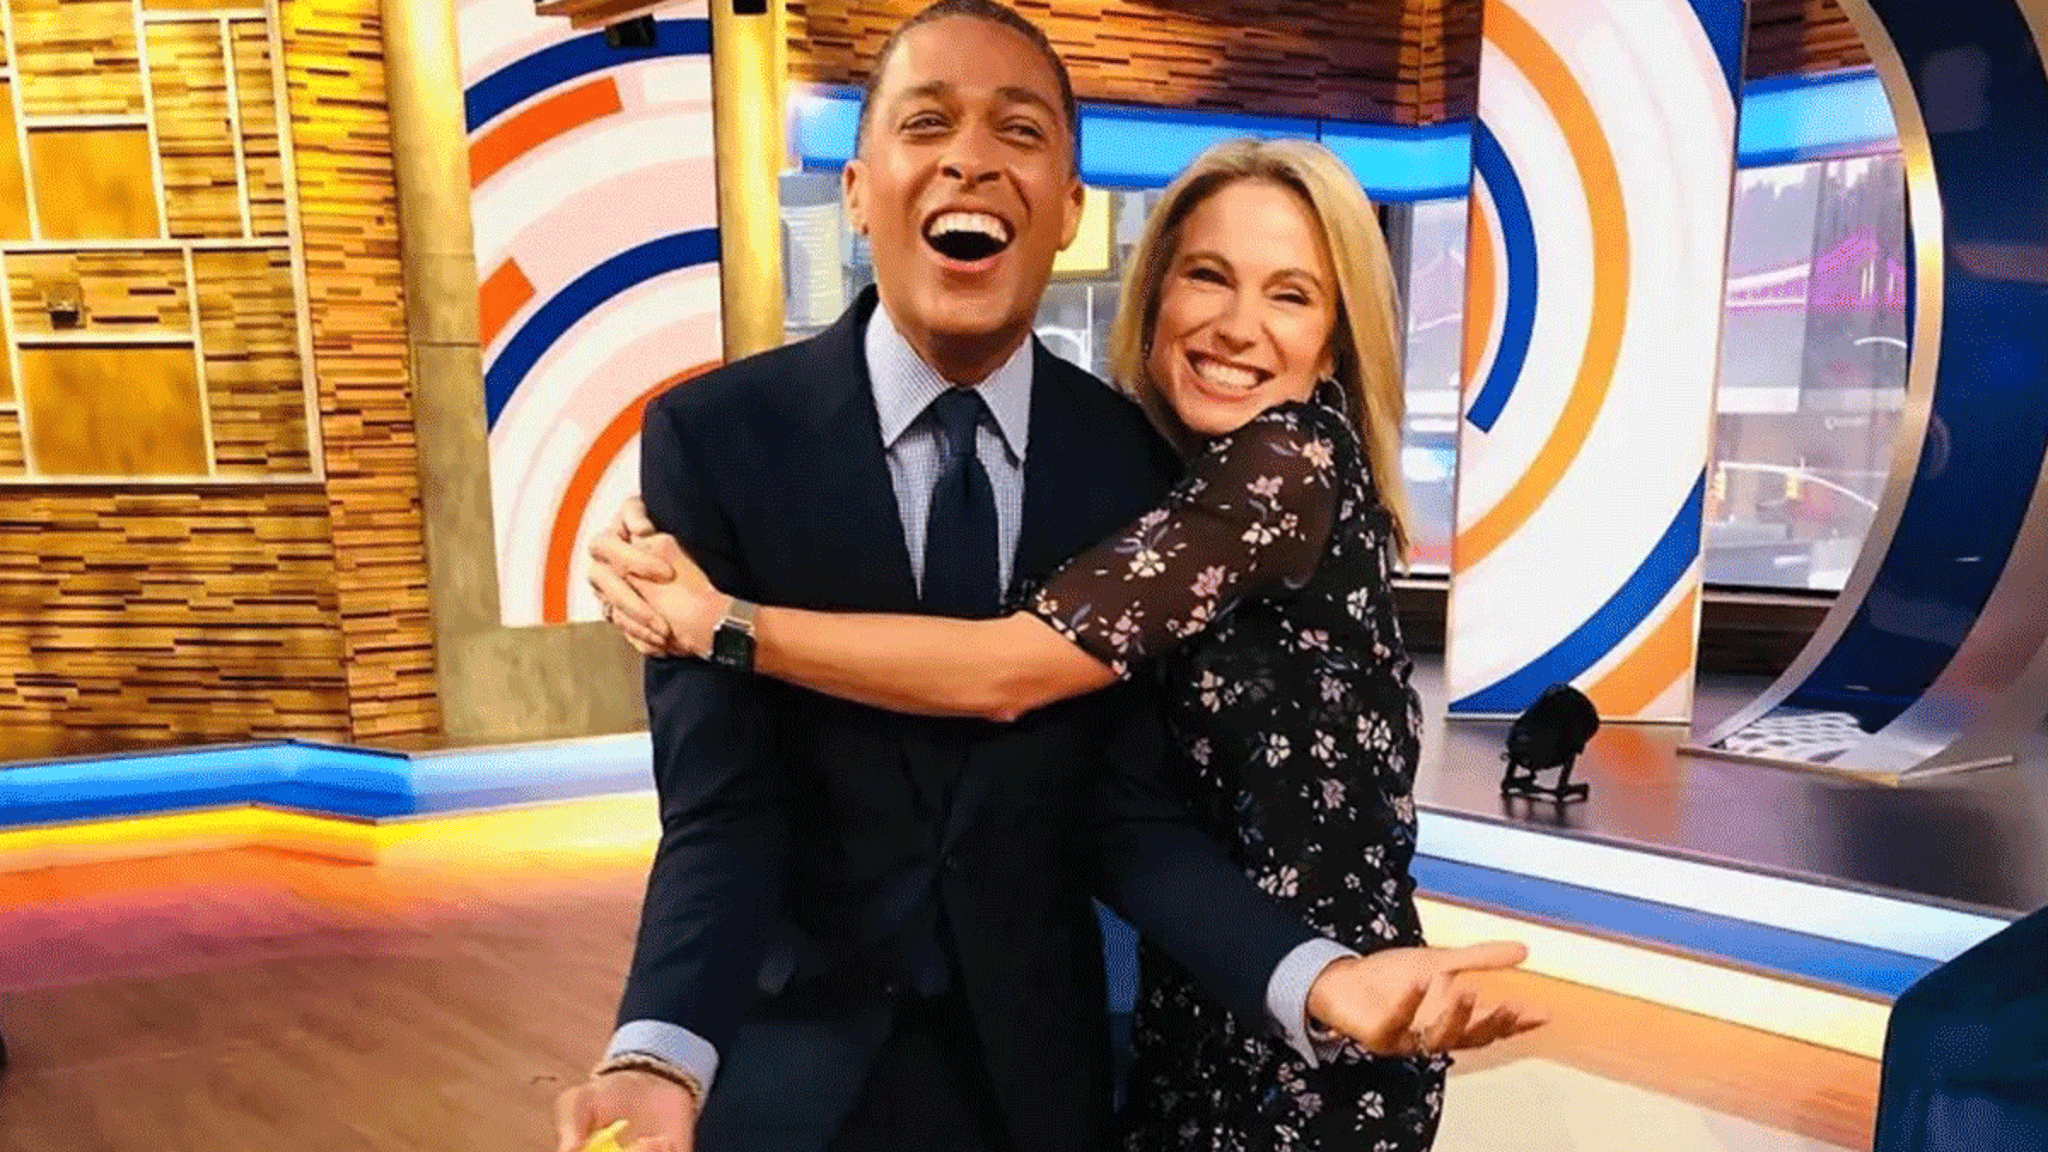 Amy Robach and T.J. Holmes Won't Face Discipline from 'GMA' for Relationship